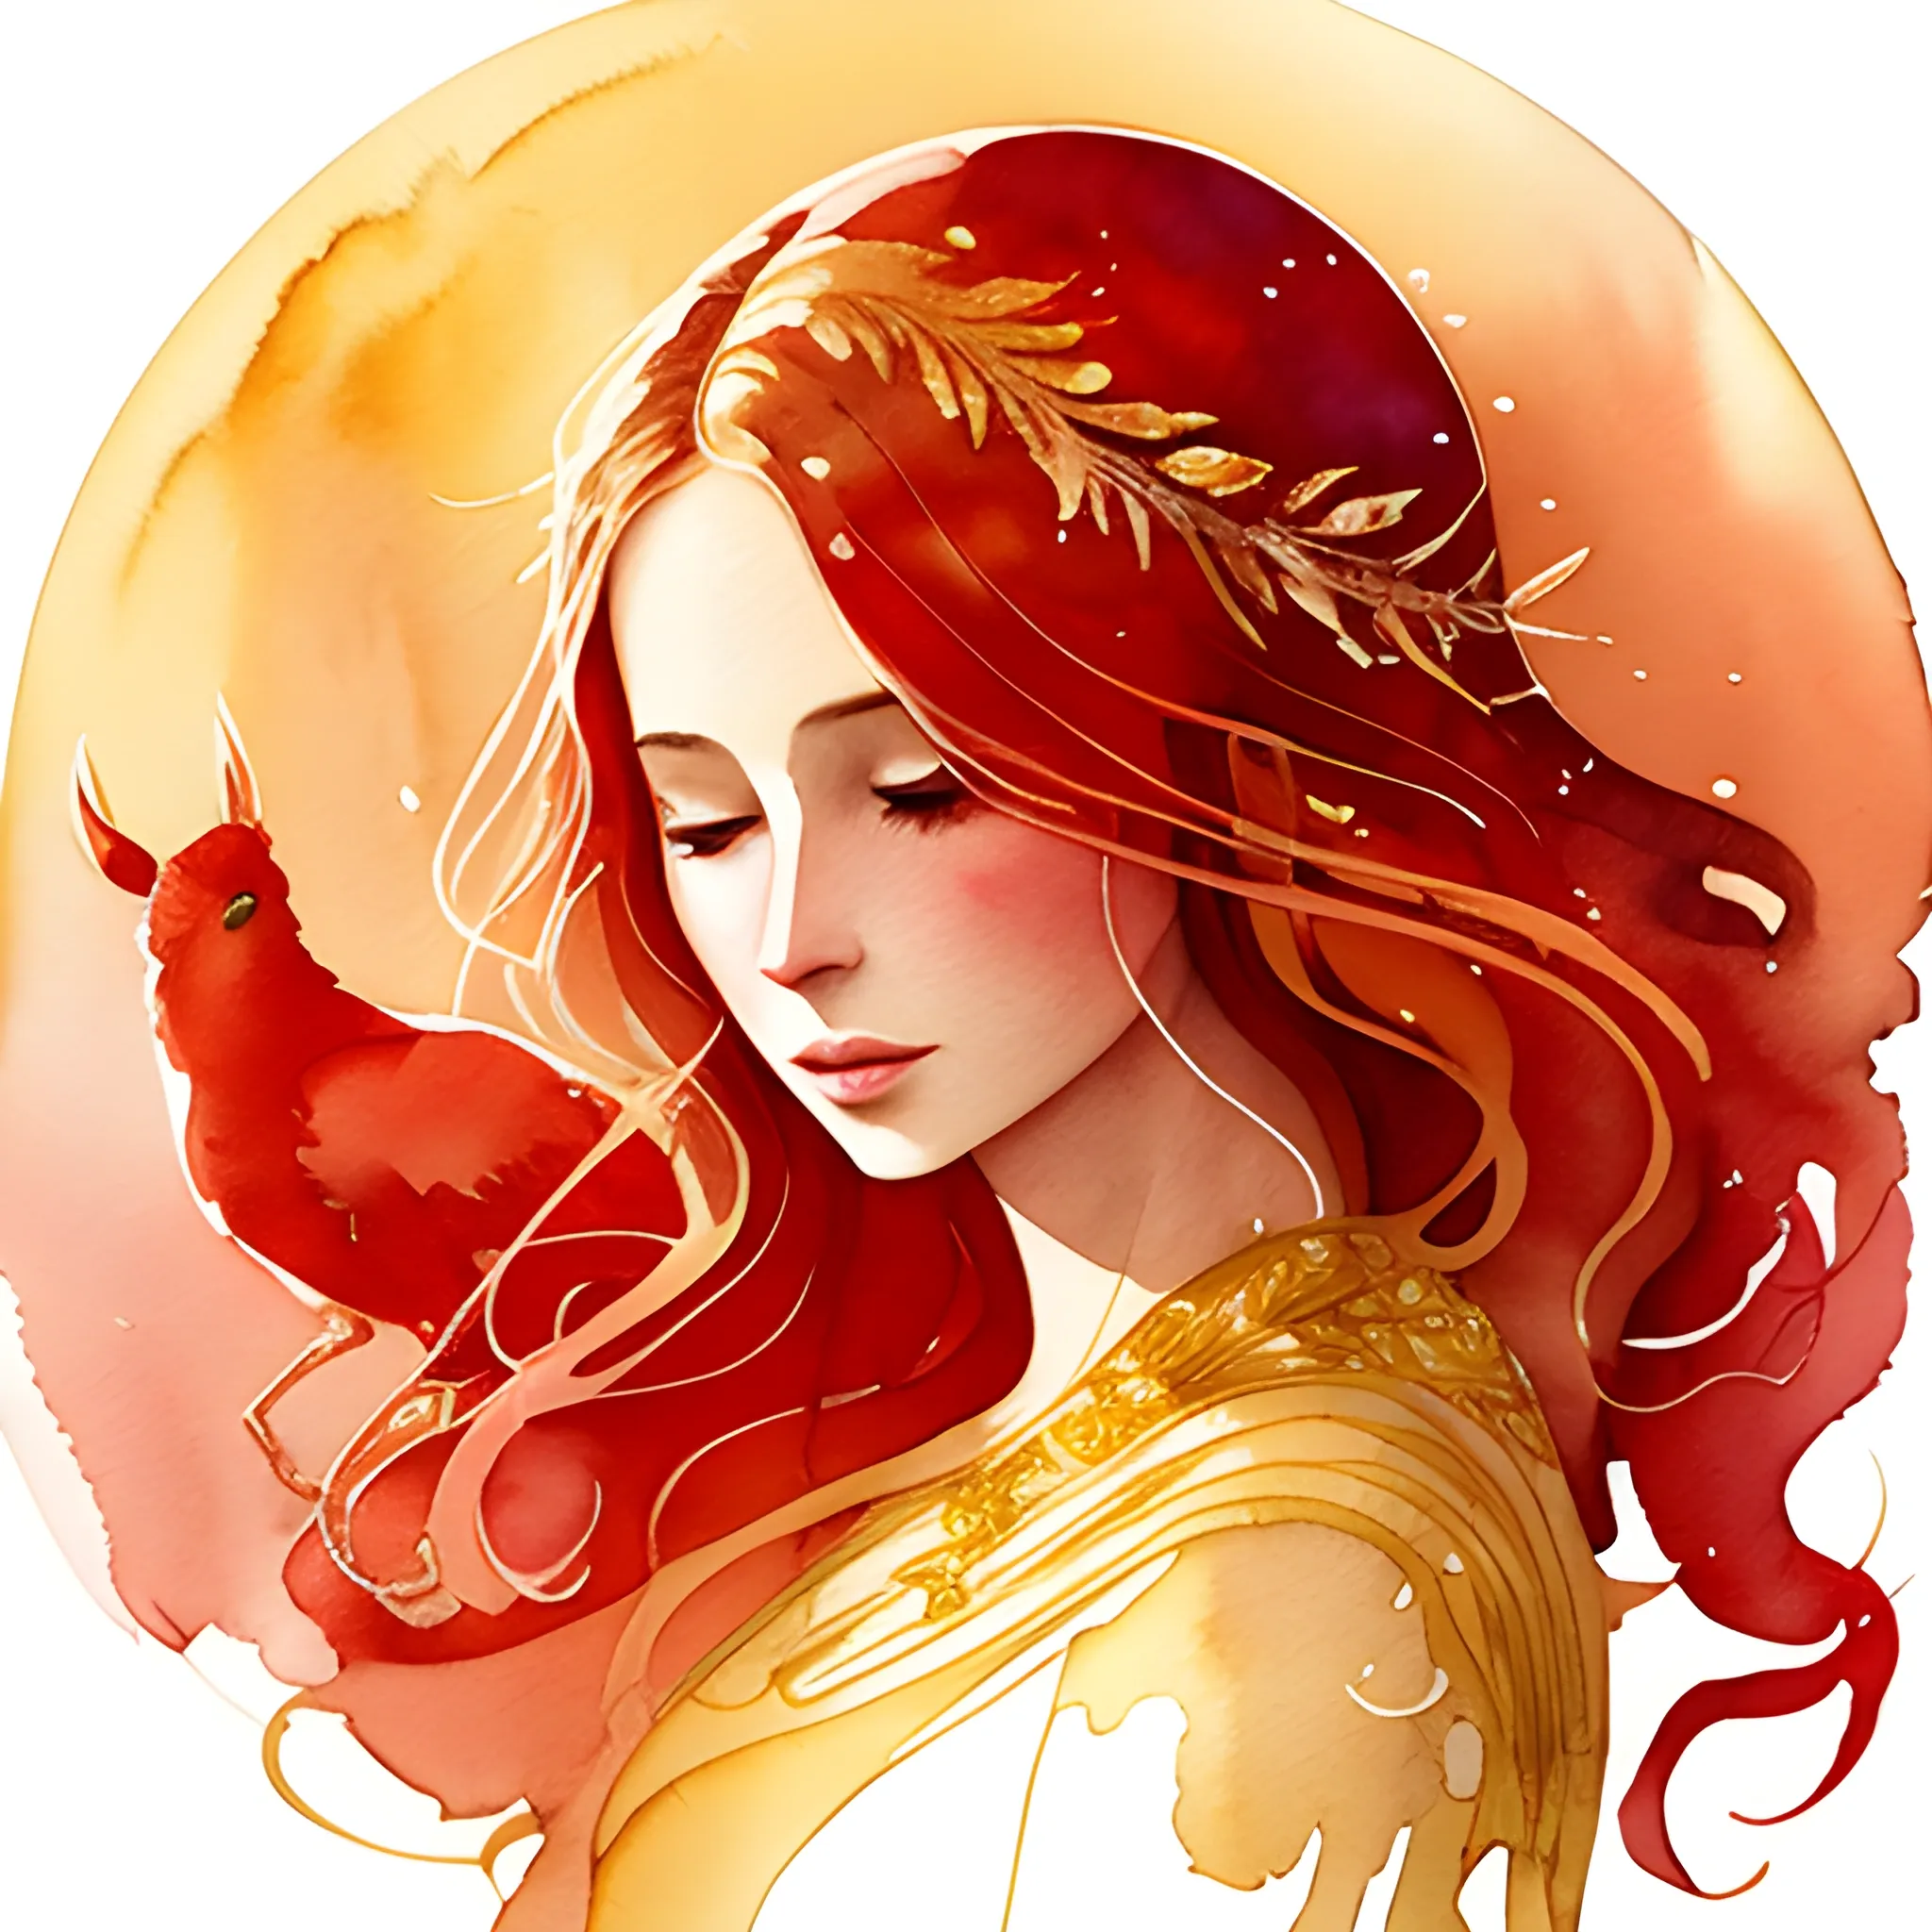 Create a watercolor illustration using only the color red. Depict a woman enveloped in golden light and surrounded by magical creatures, as her skin turns to gold in a dreamlike world